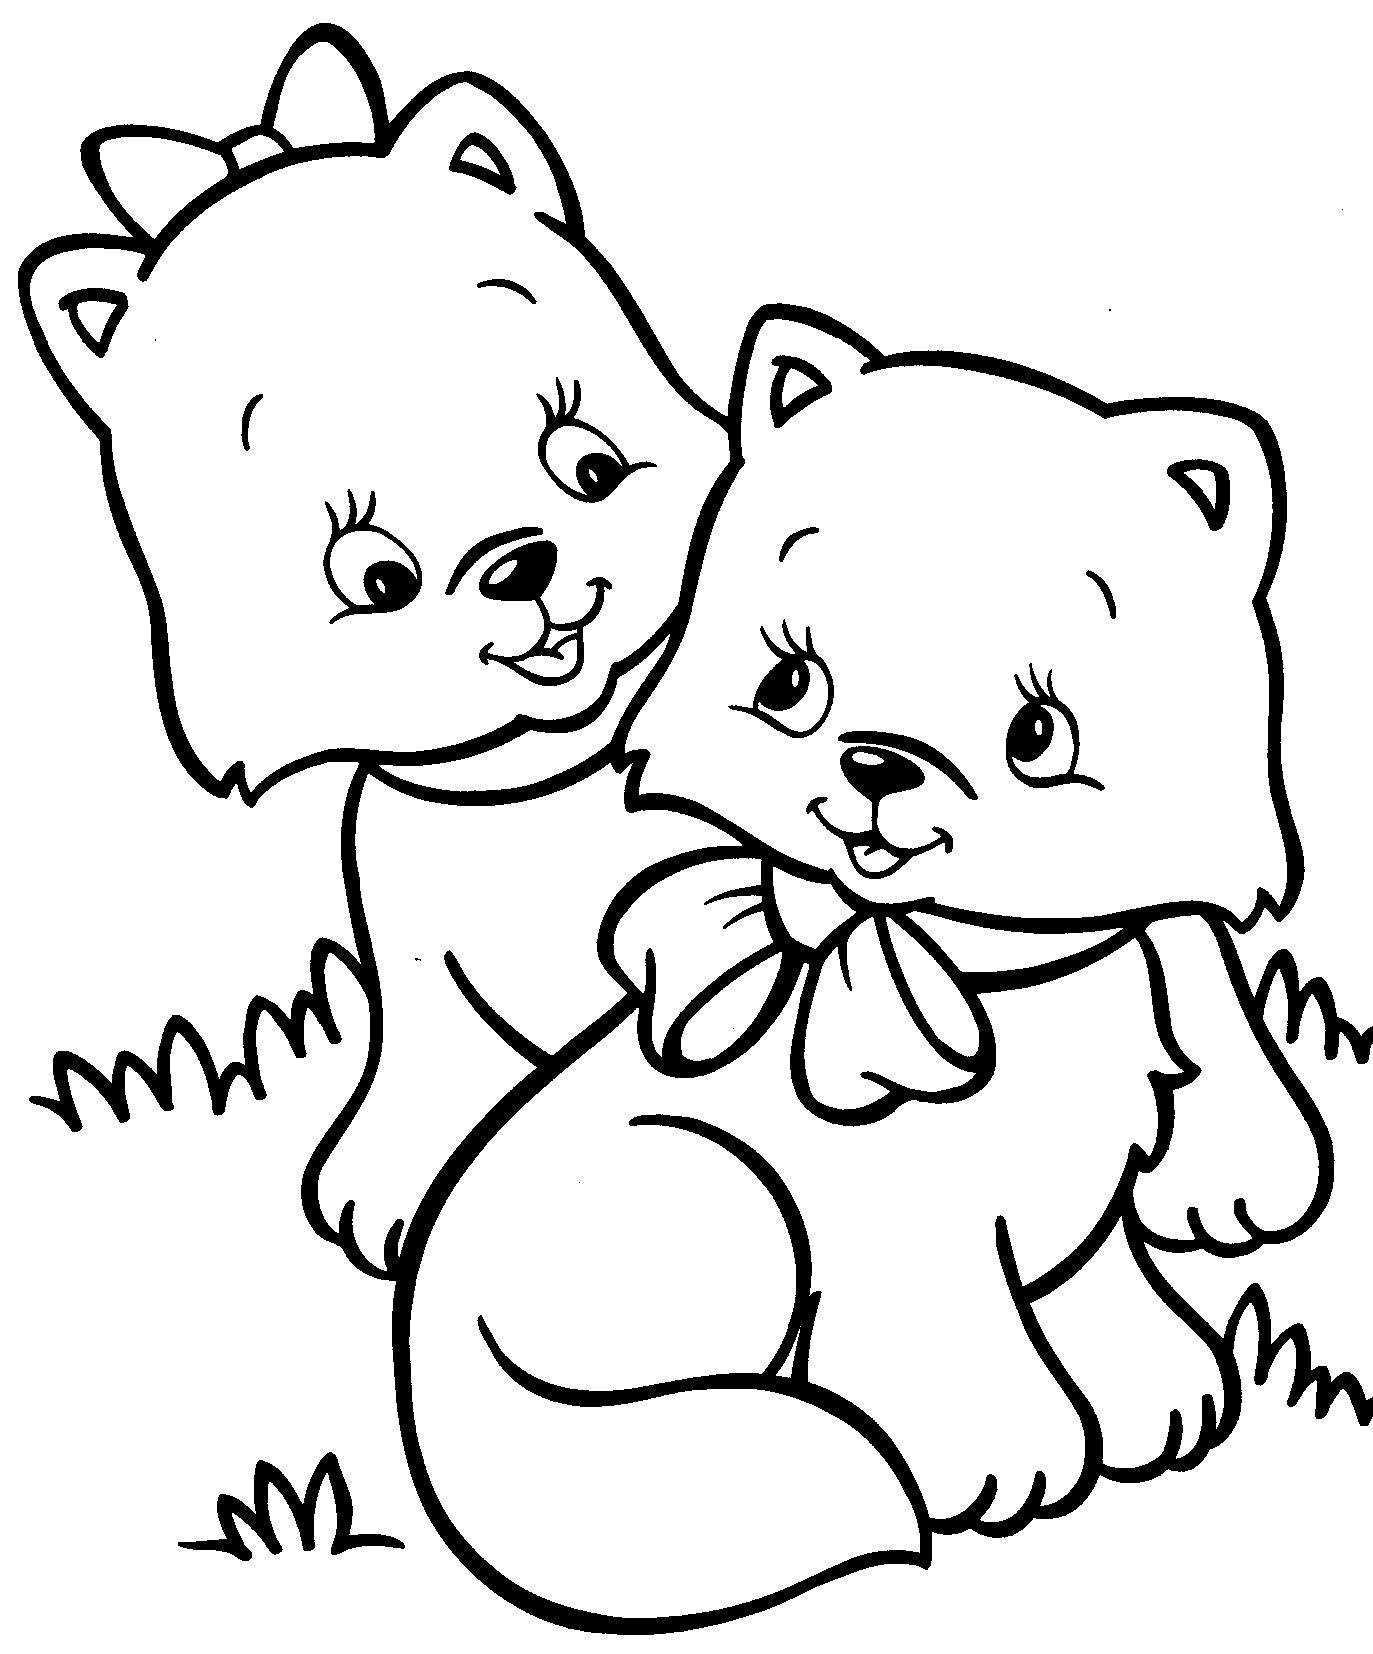 Cats Coloring Pages For Kids
 Pet Cat Coloring Pages Free Printable Pretty Kitty With A